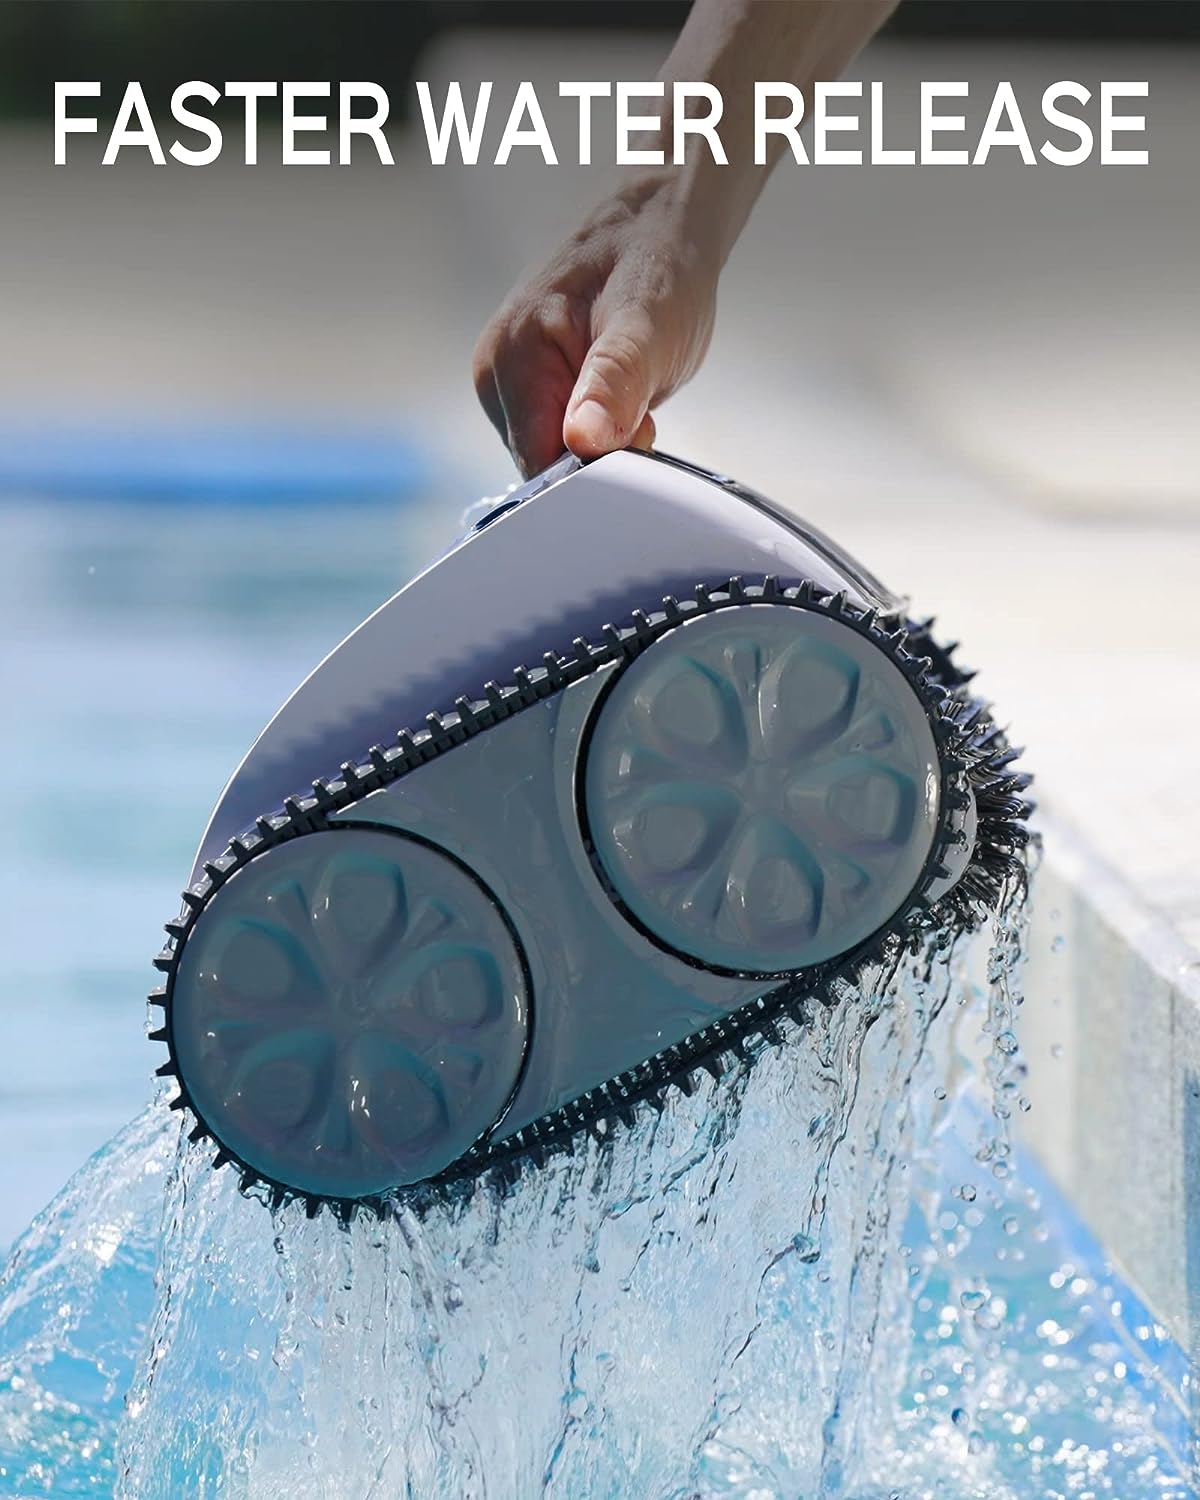 WYBOT Cordless Robotic Pool Cleaner Review